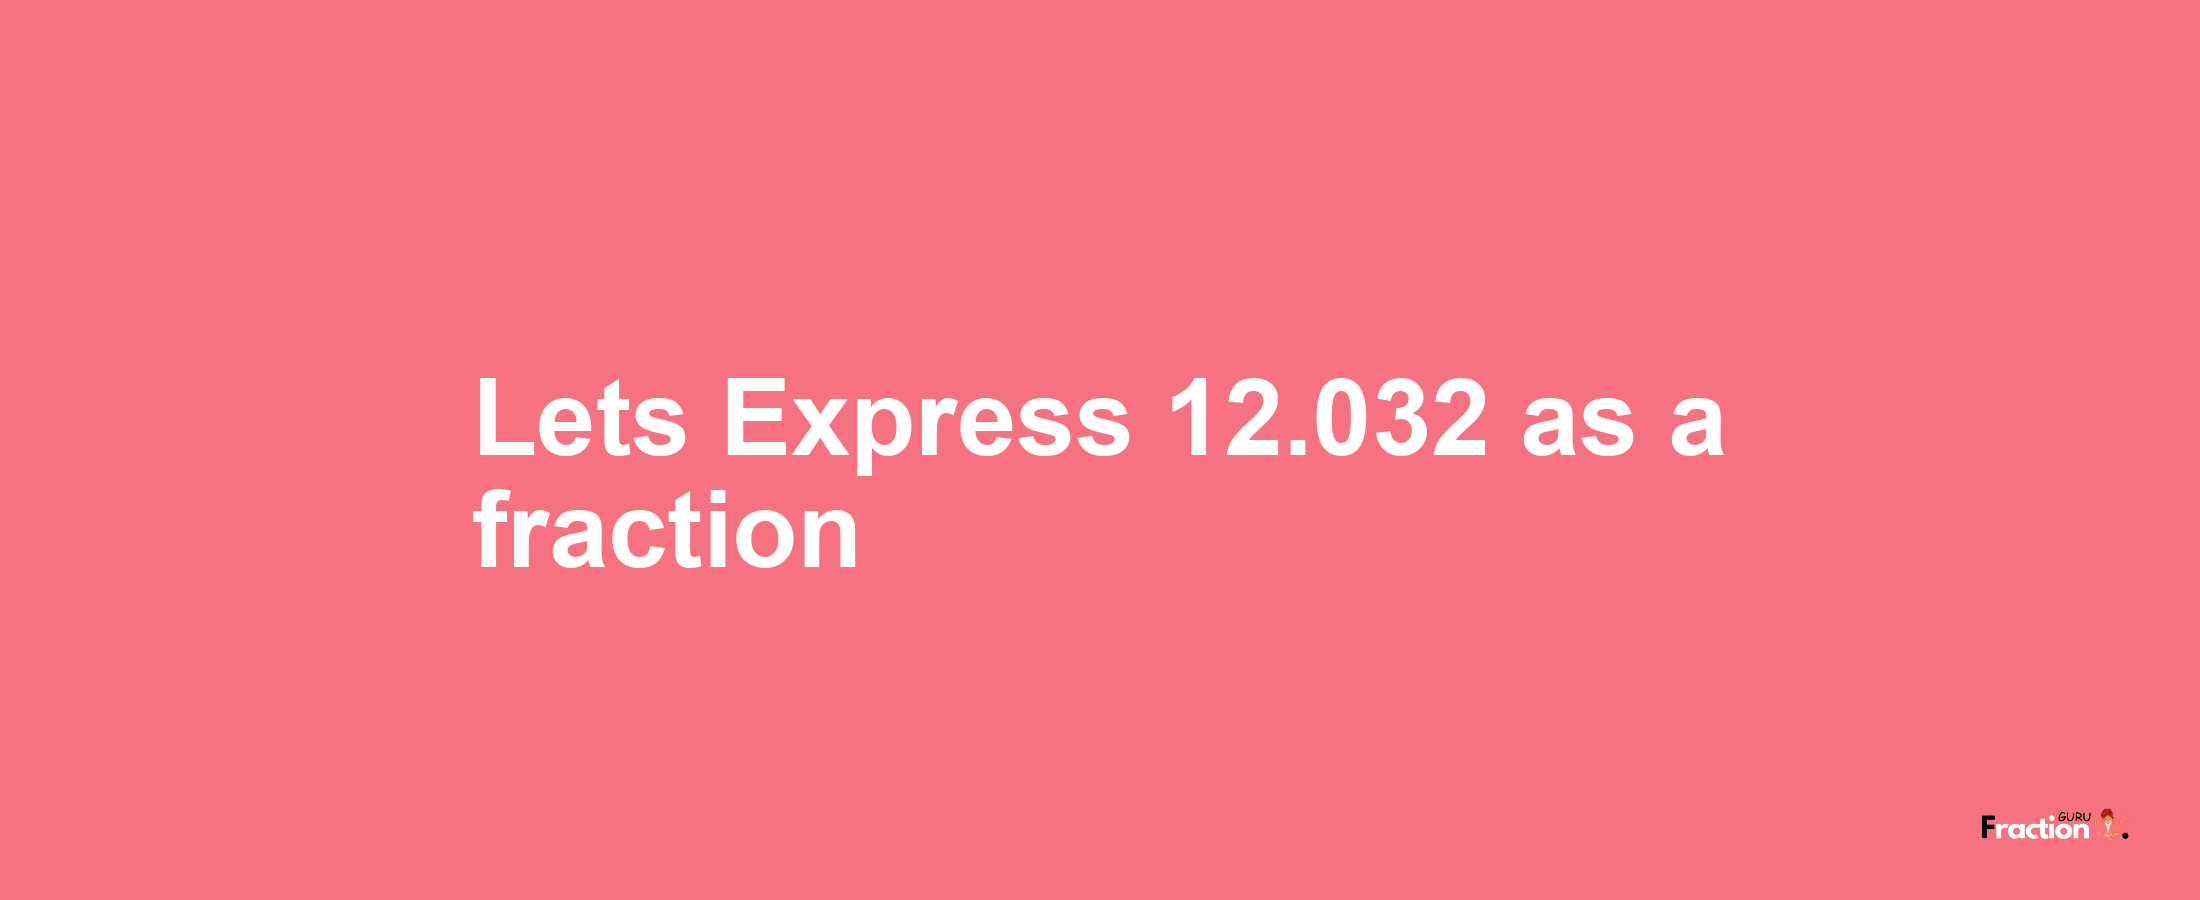 Lets Express 12.032 as afraction